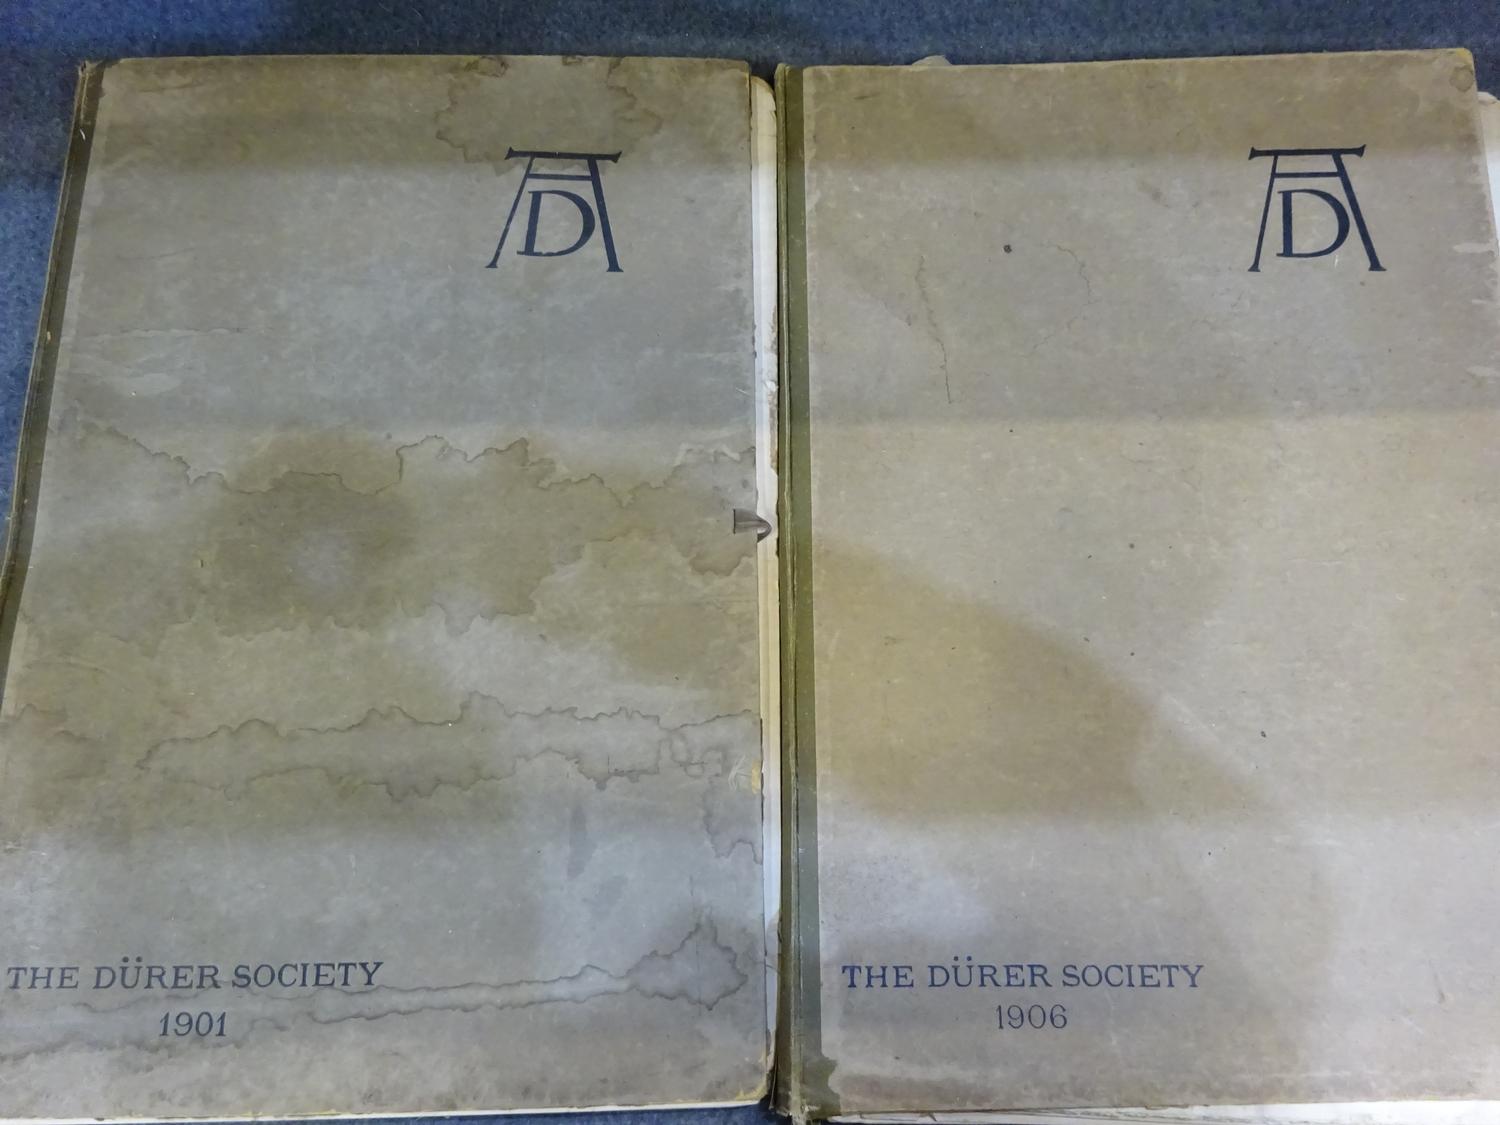 The Dürer Society folios from 1901 & 1906 (First and Fourth Editions)